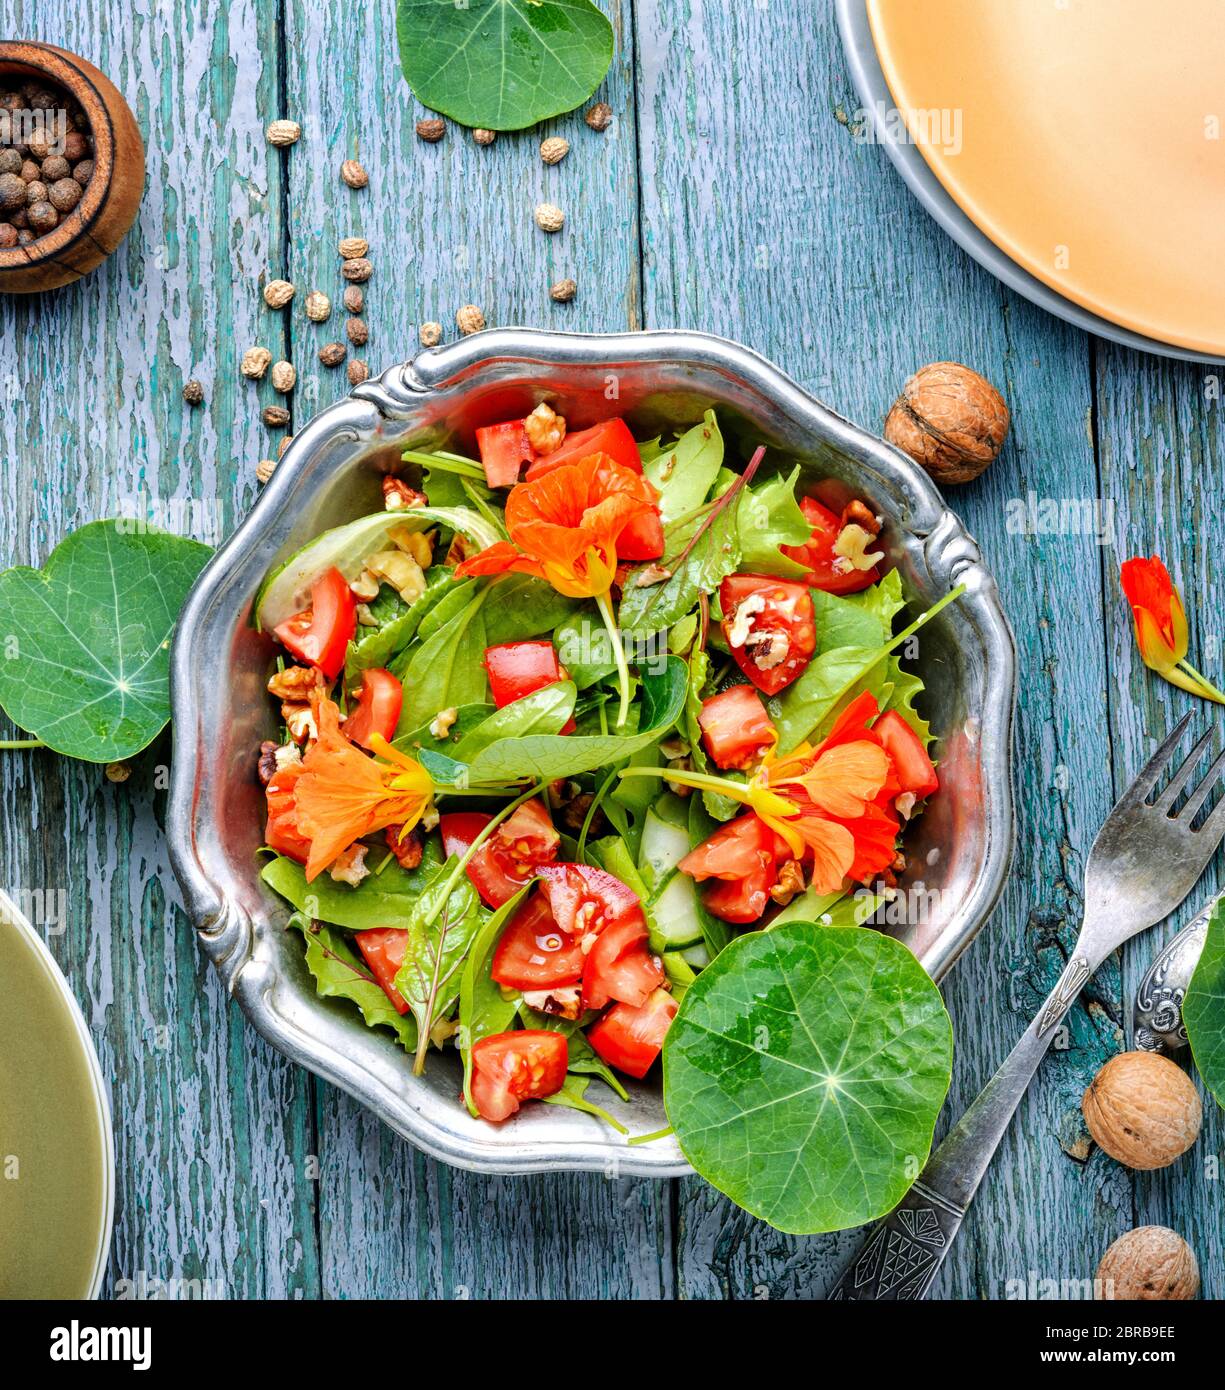 Healthy salad with flowers, nasturtium leaves, tomatoes and nuts. Indian salad.Diet food Stock Photo